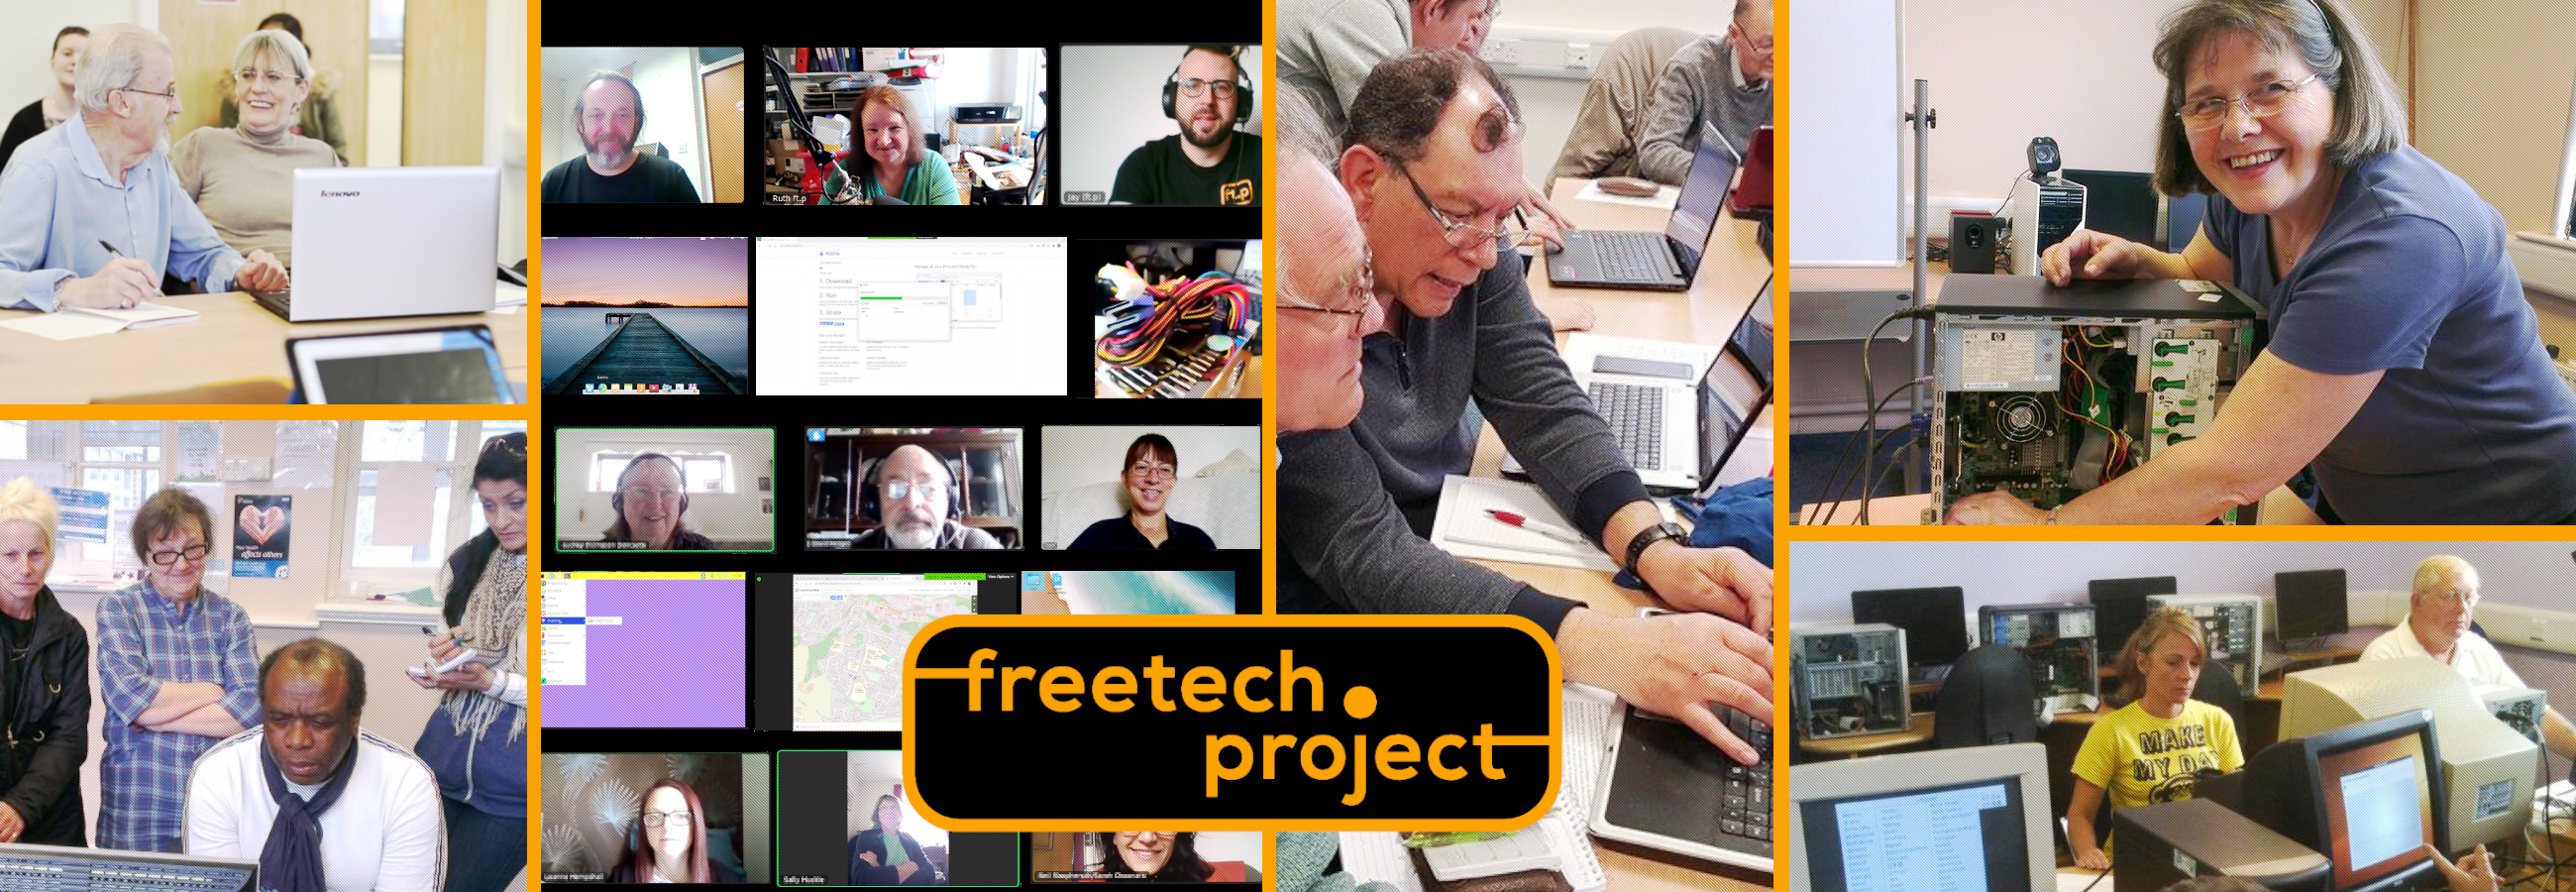 A montage of FreeTech Project activities with the organisation's logo, including different people with different kinds of technology, from mobile devices to laptop and desktop computers, in-person and online via video meet-ups.